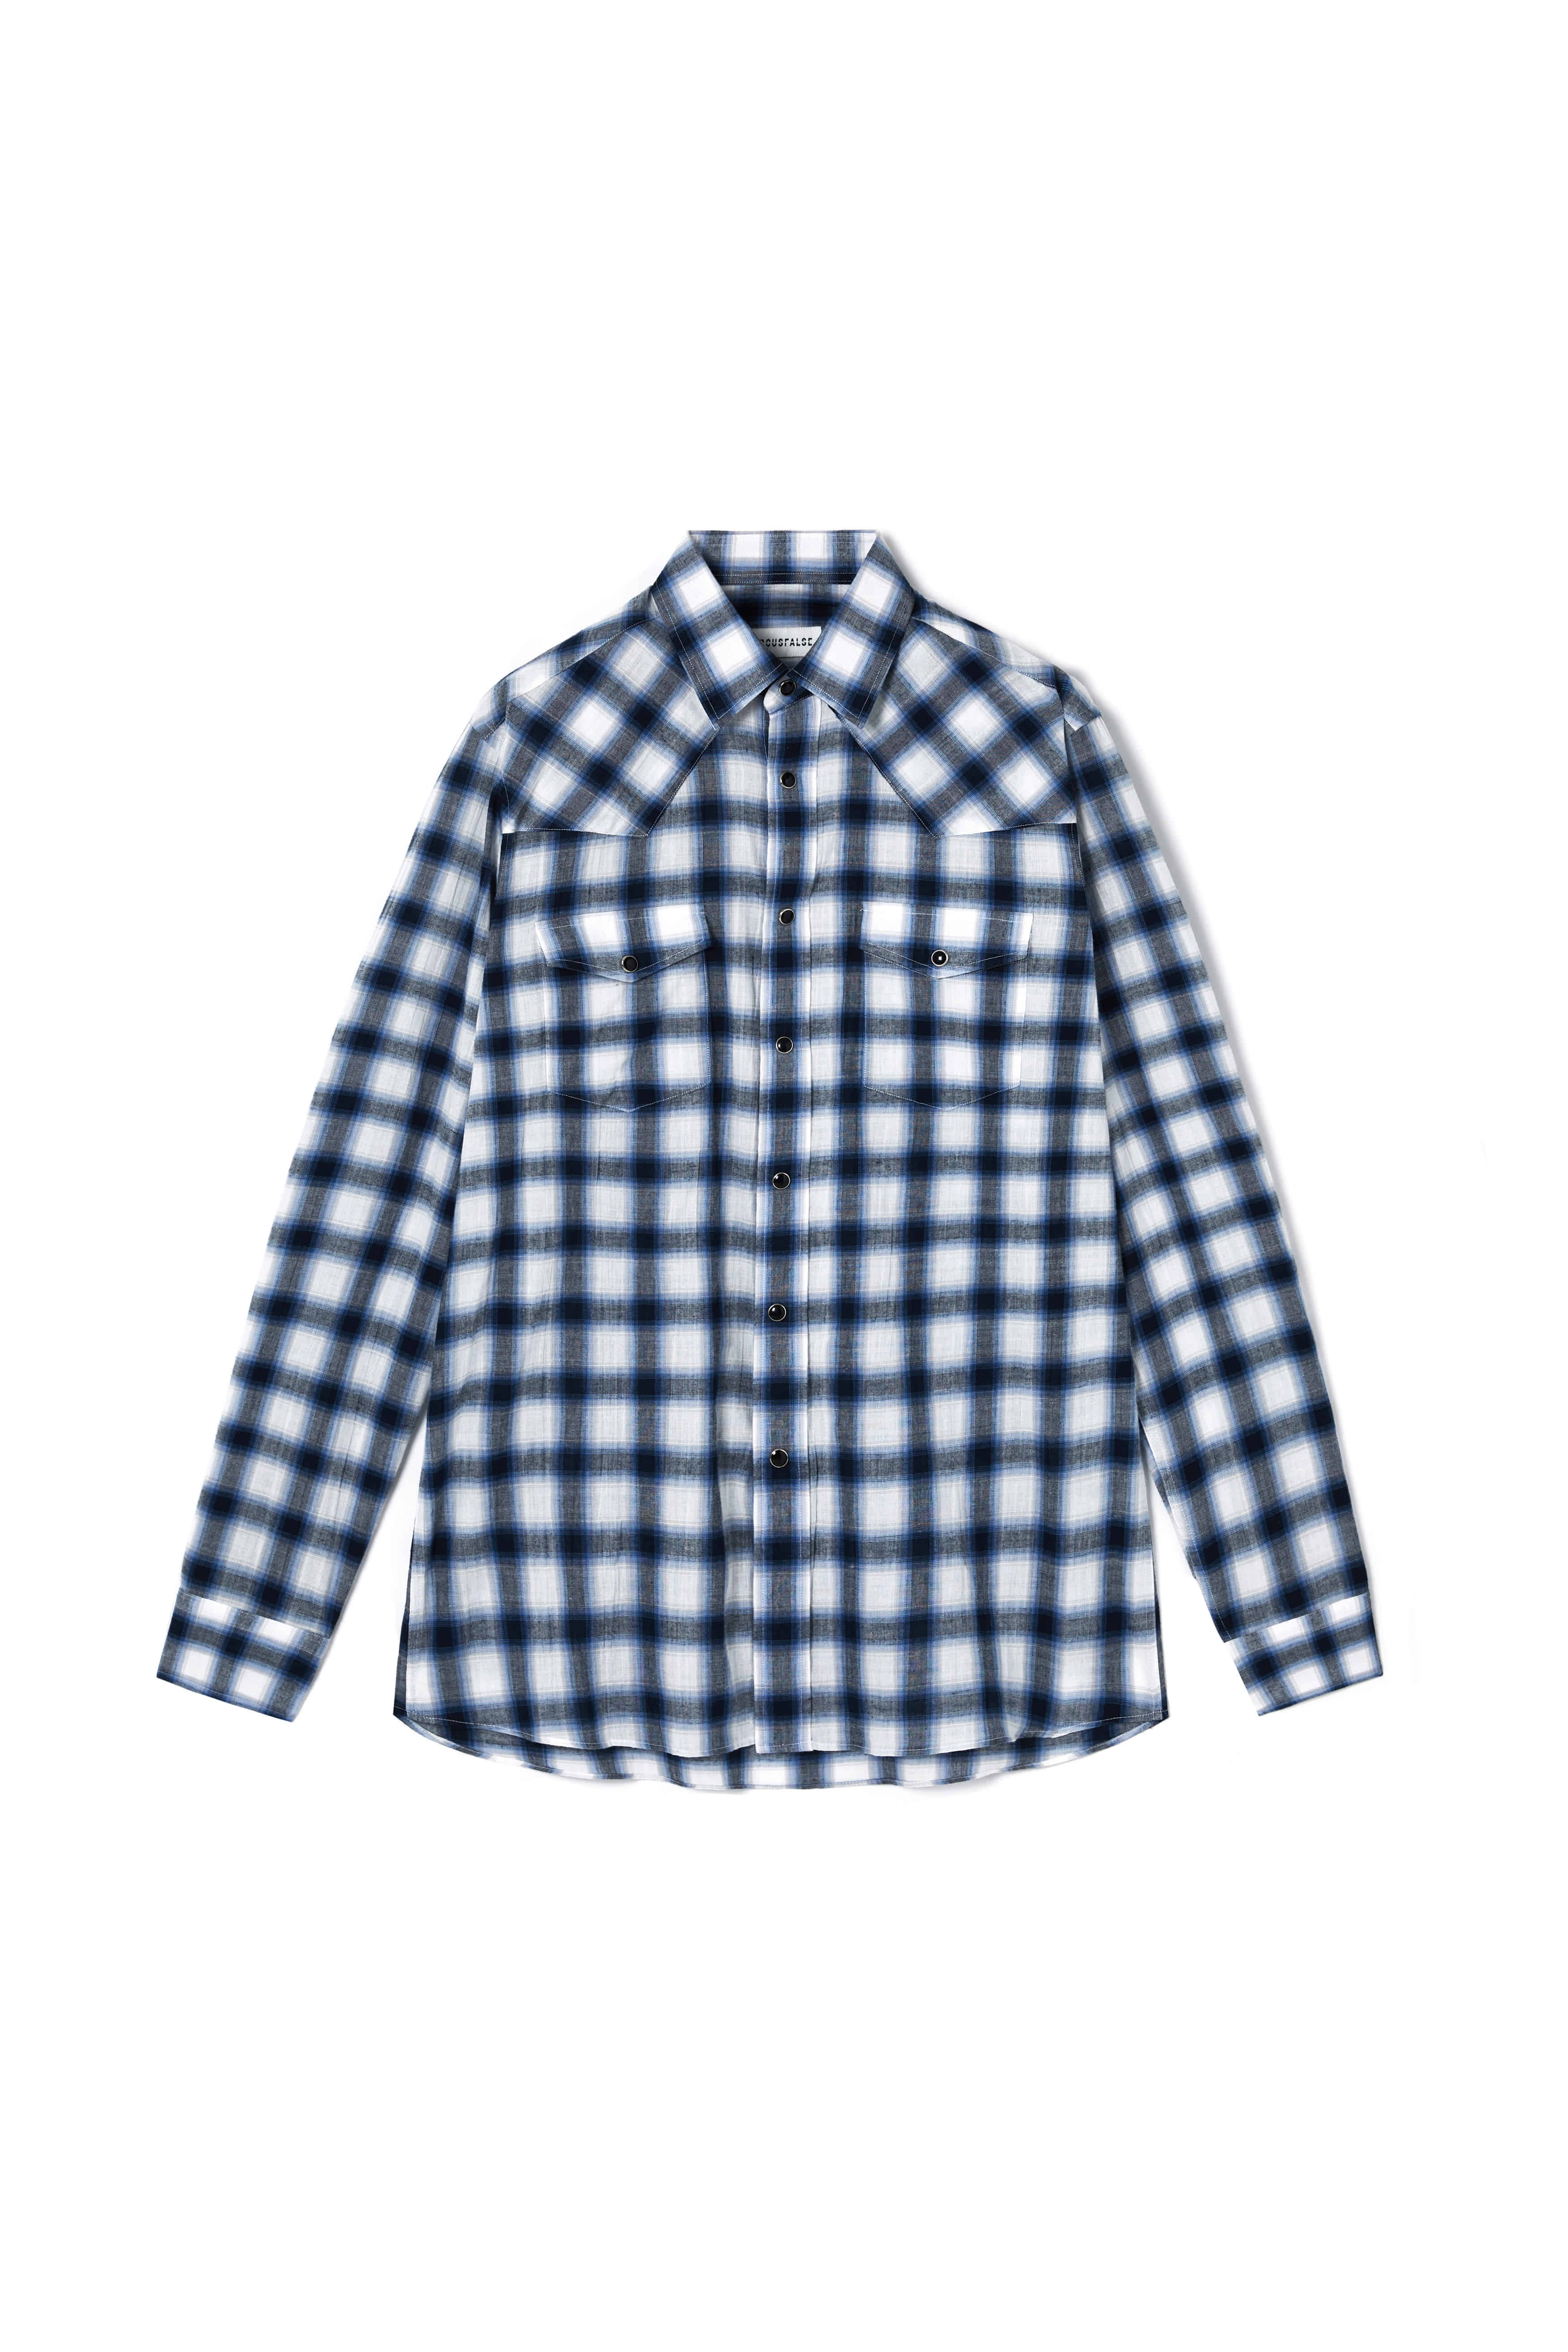 WESTERN SHIRTS IN NAVY MULTI CHEKED